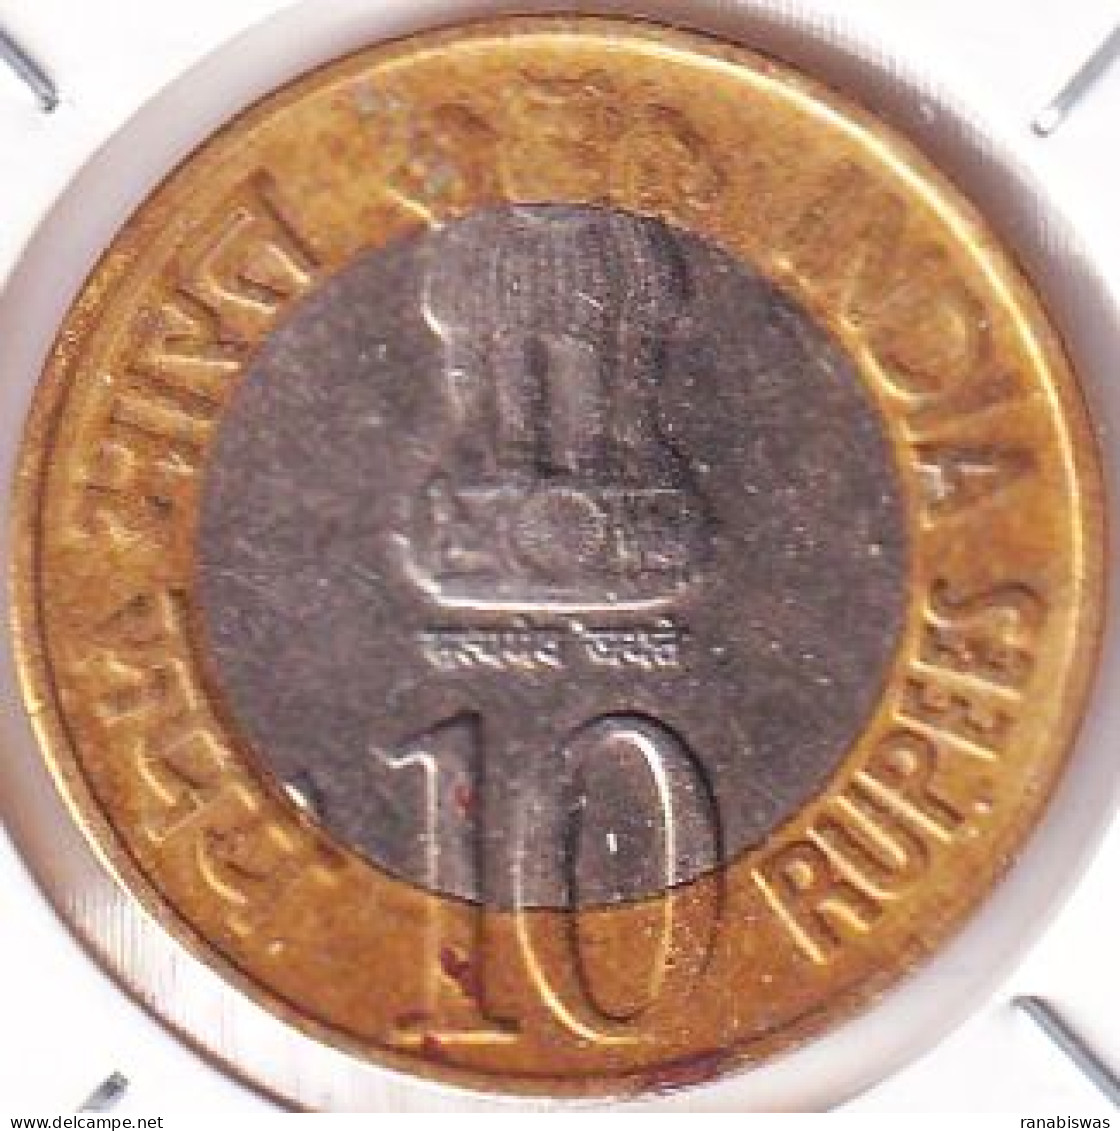 INDIA COIN LOT 453, 10 RUPEES 2010, RESERVE BANK, HYDERABAD MINT, AUNC, RARE - India